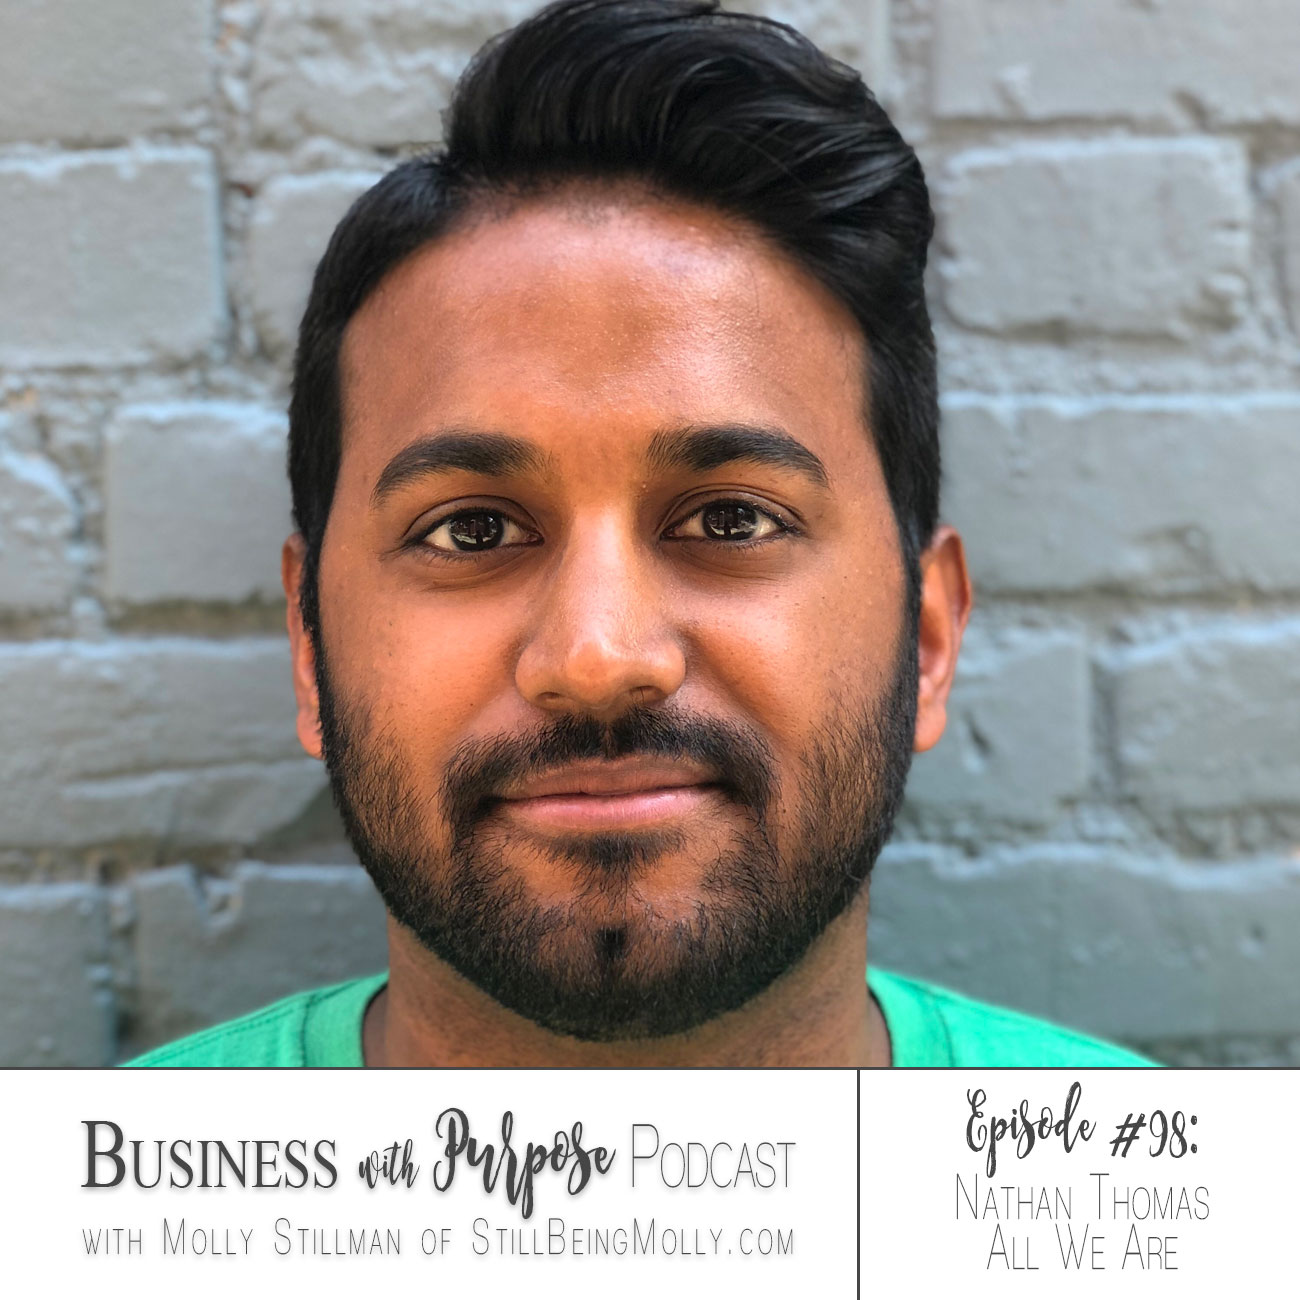 Business with Purpose Podcast EP 98: Nathan Thomas, All We Are